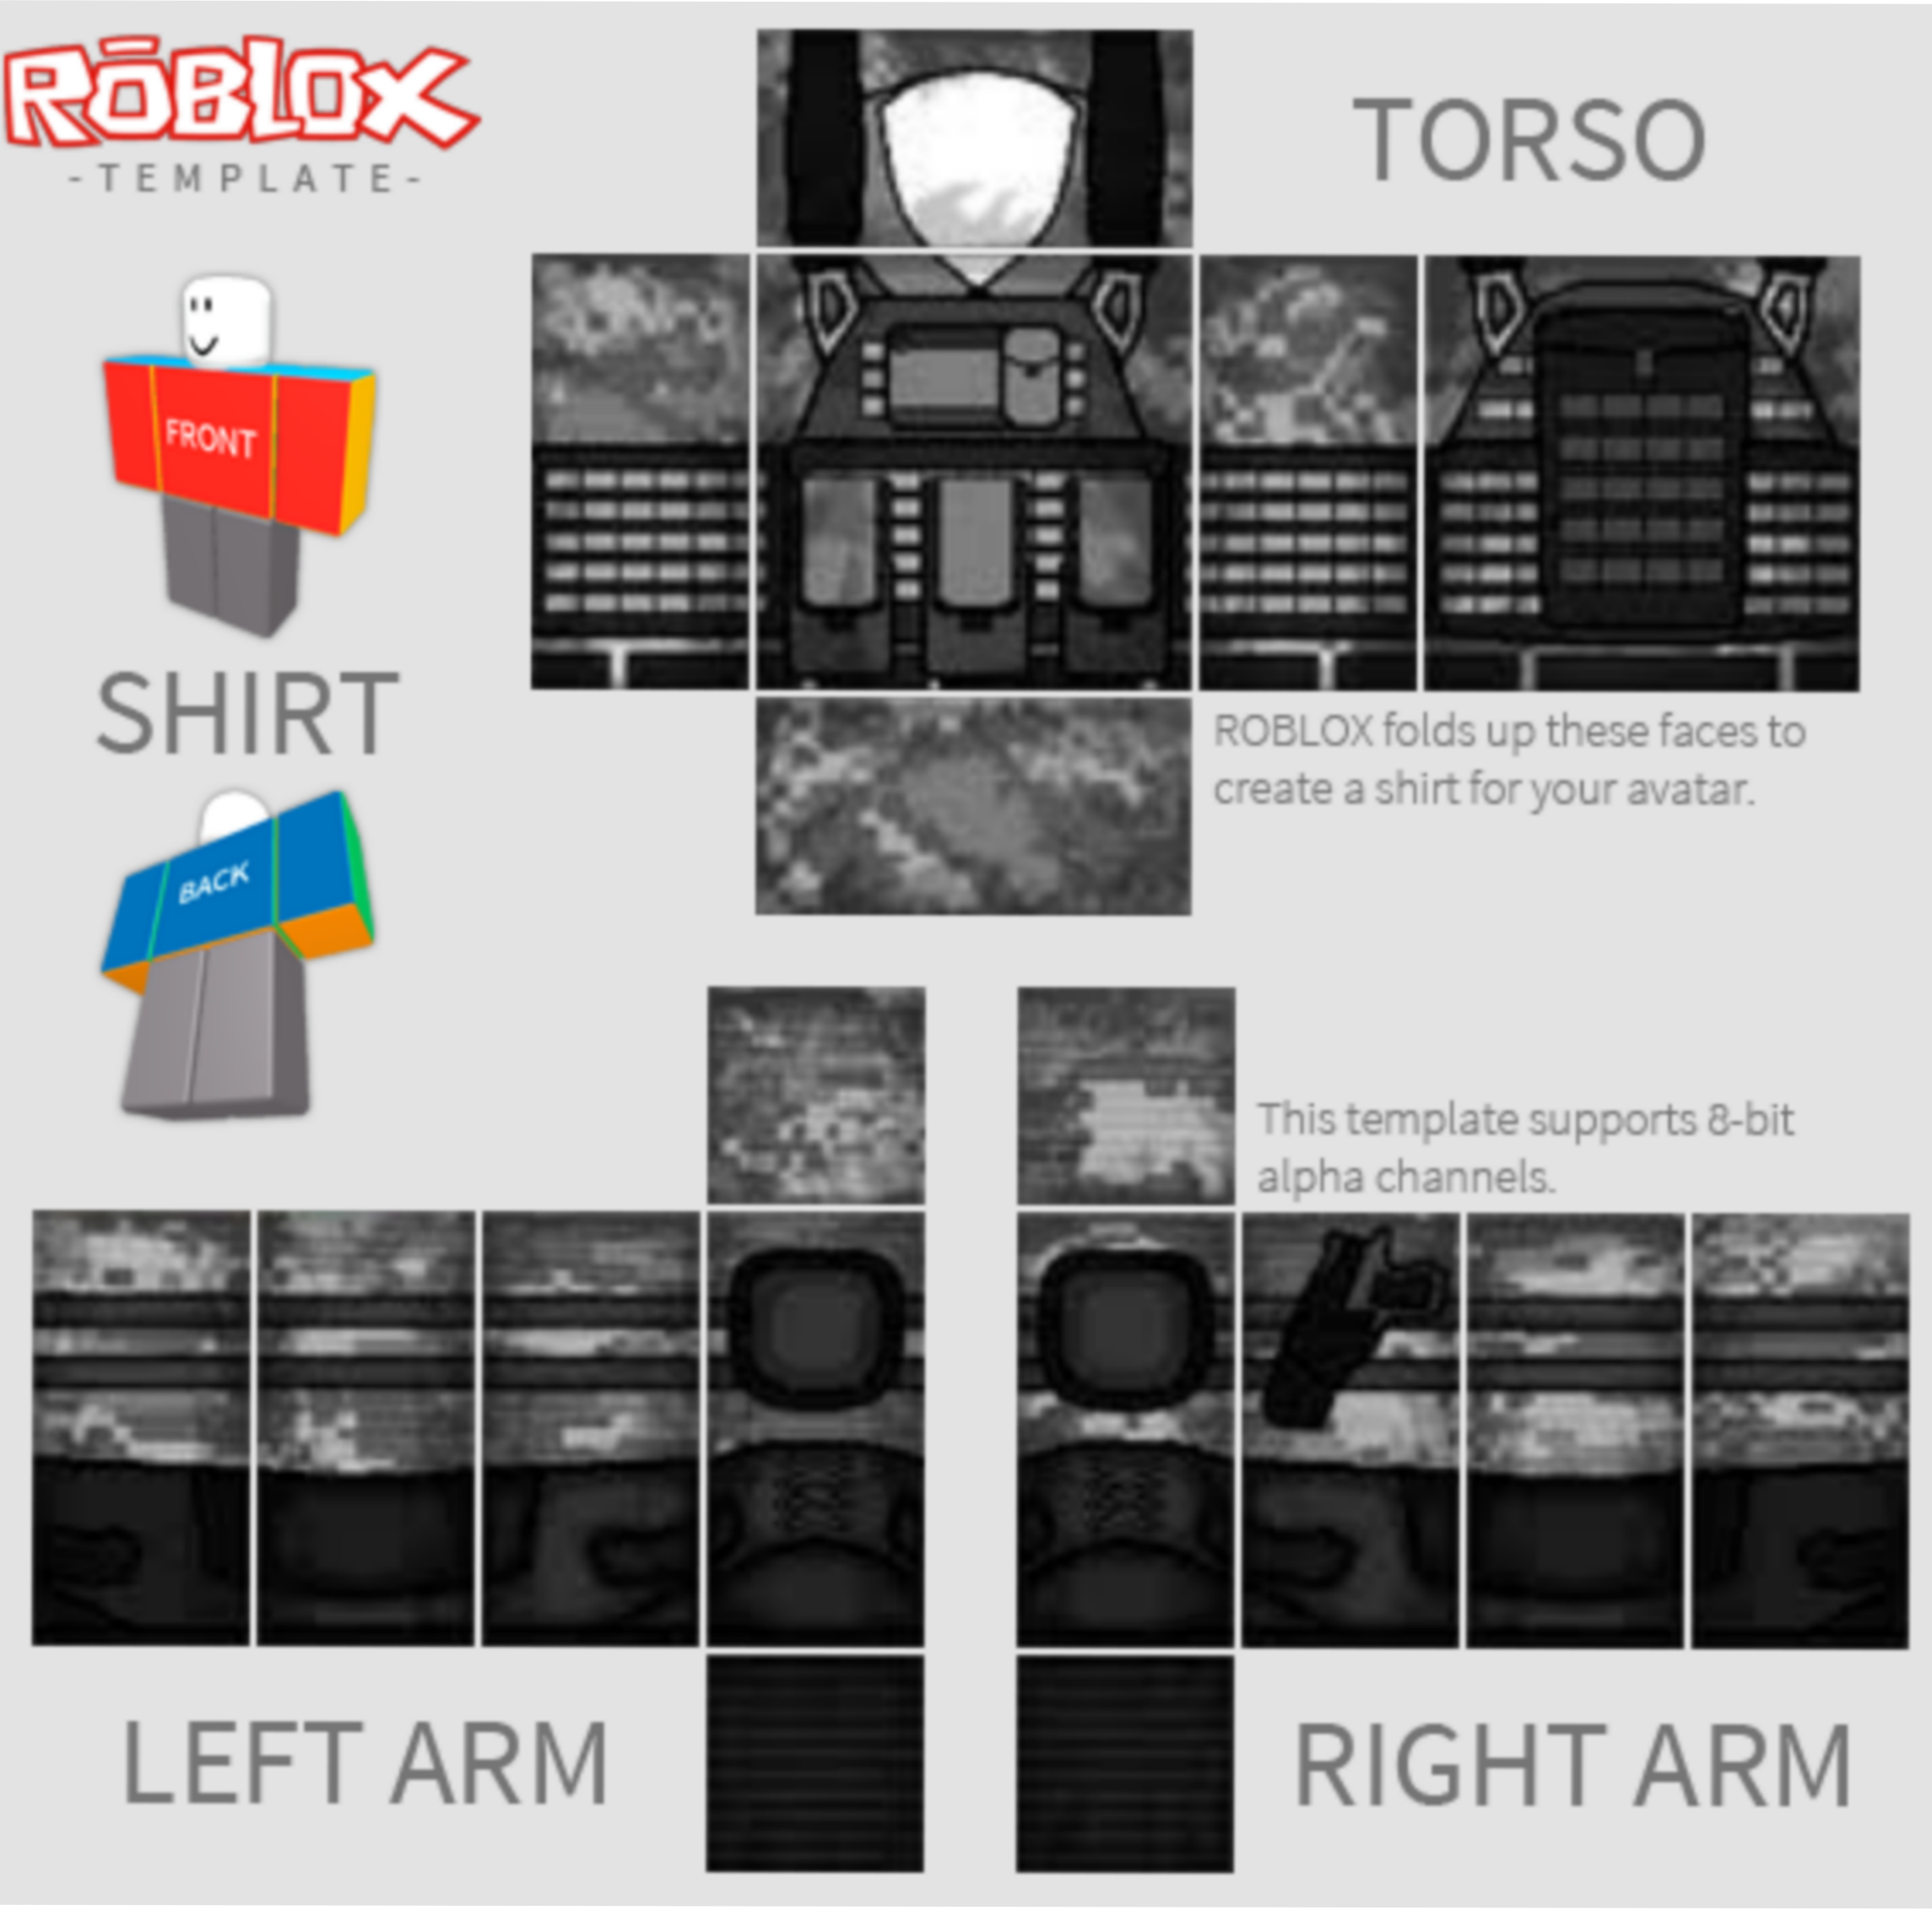 Roblox Template Swat Shirt Image By Guicorreia13795 - roblox swat template